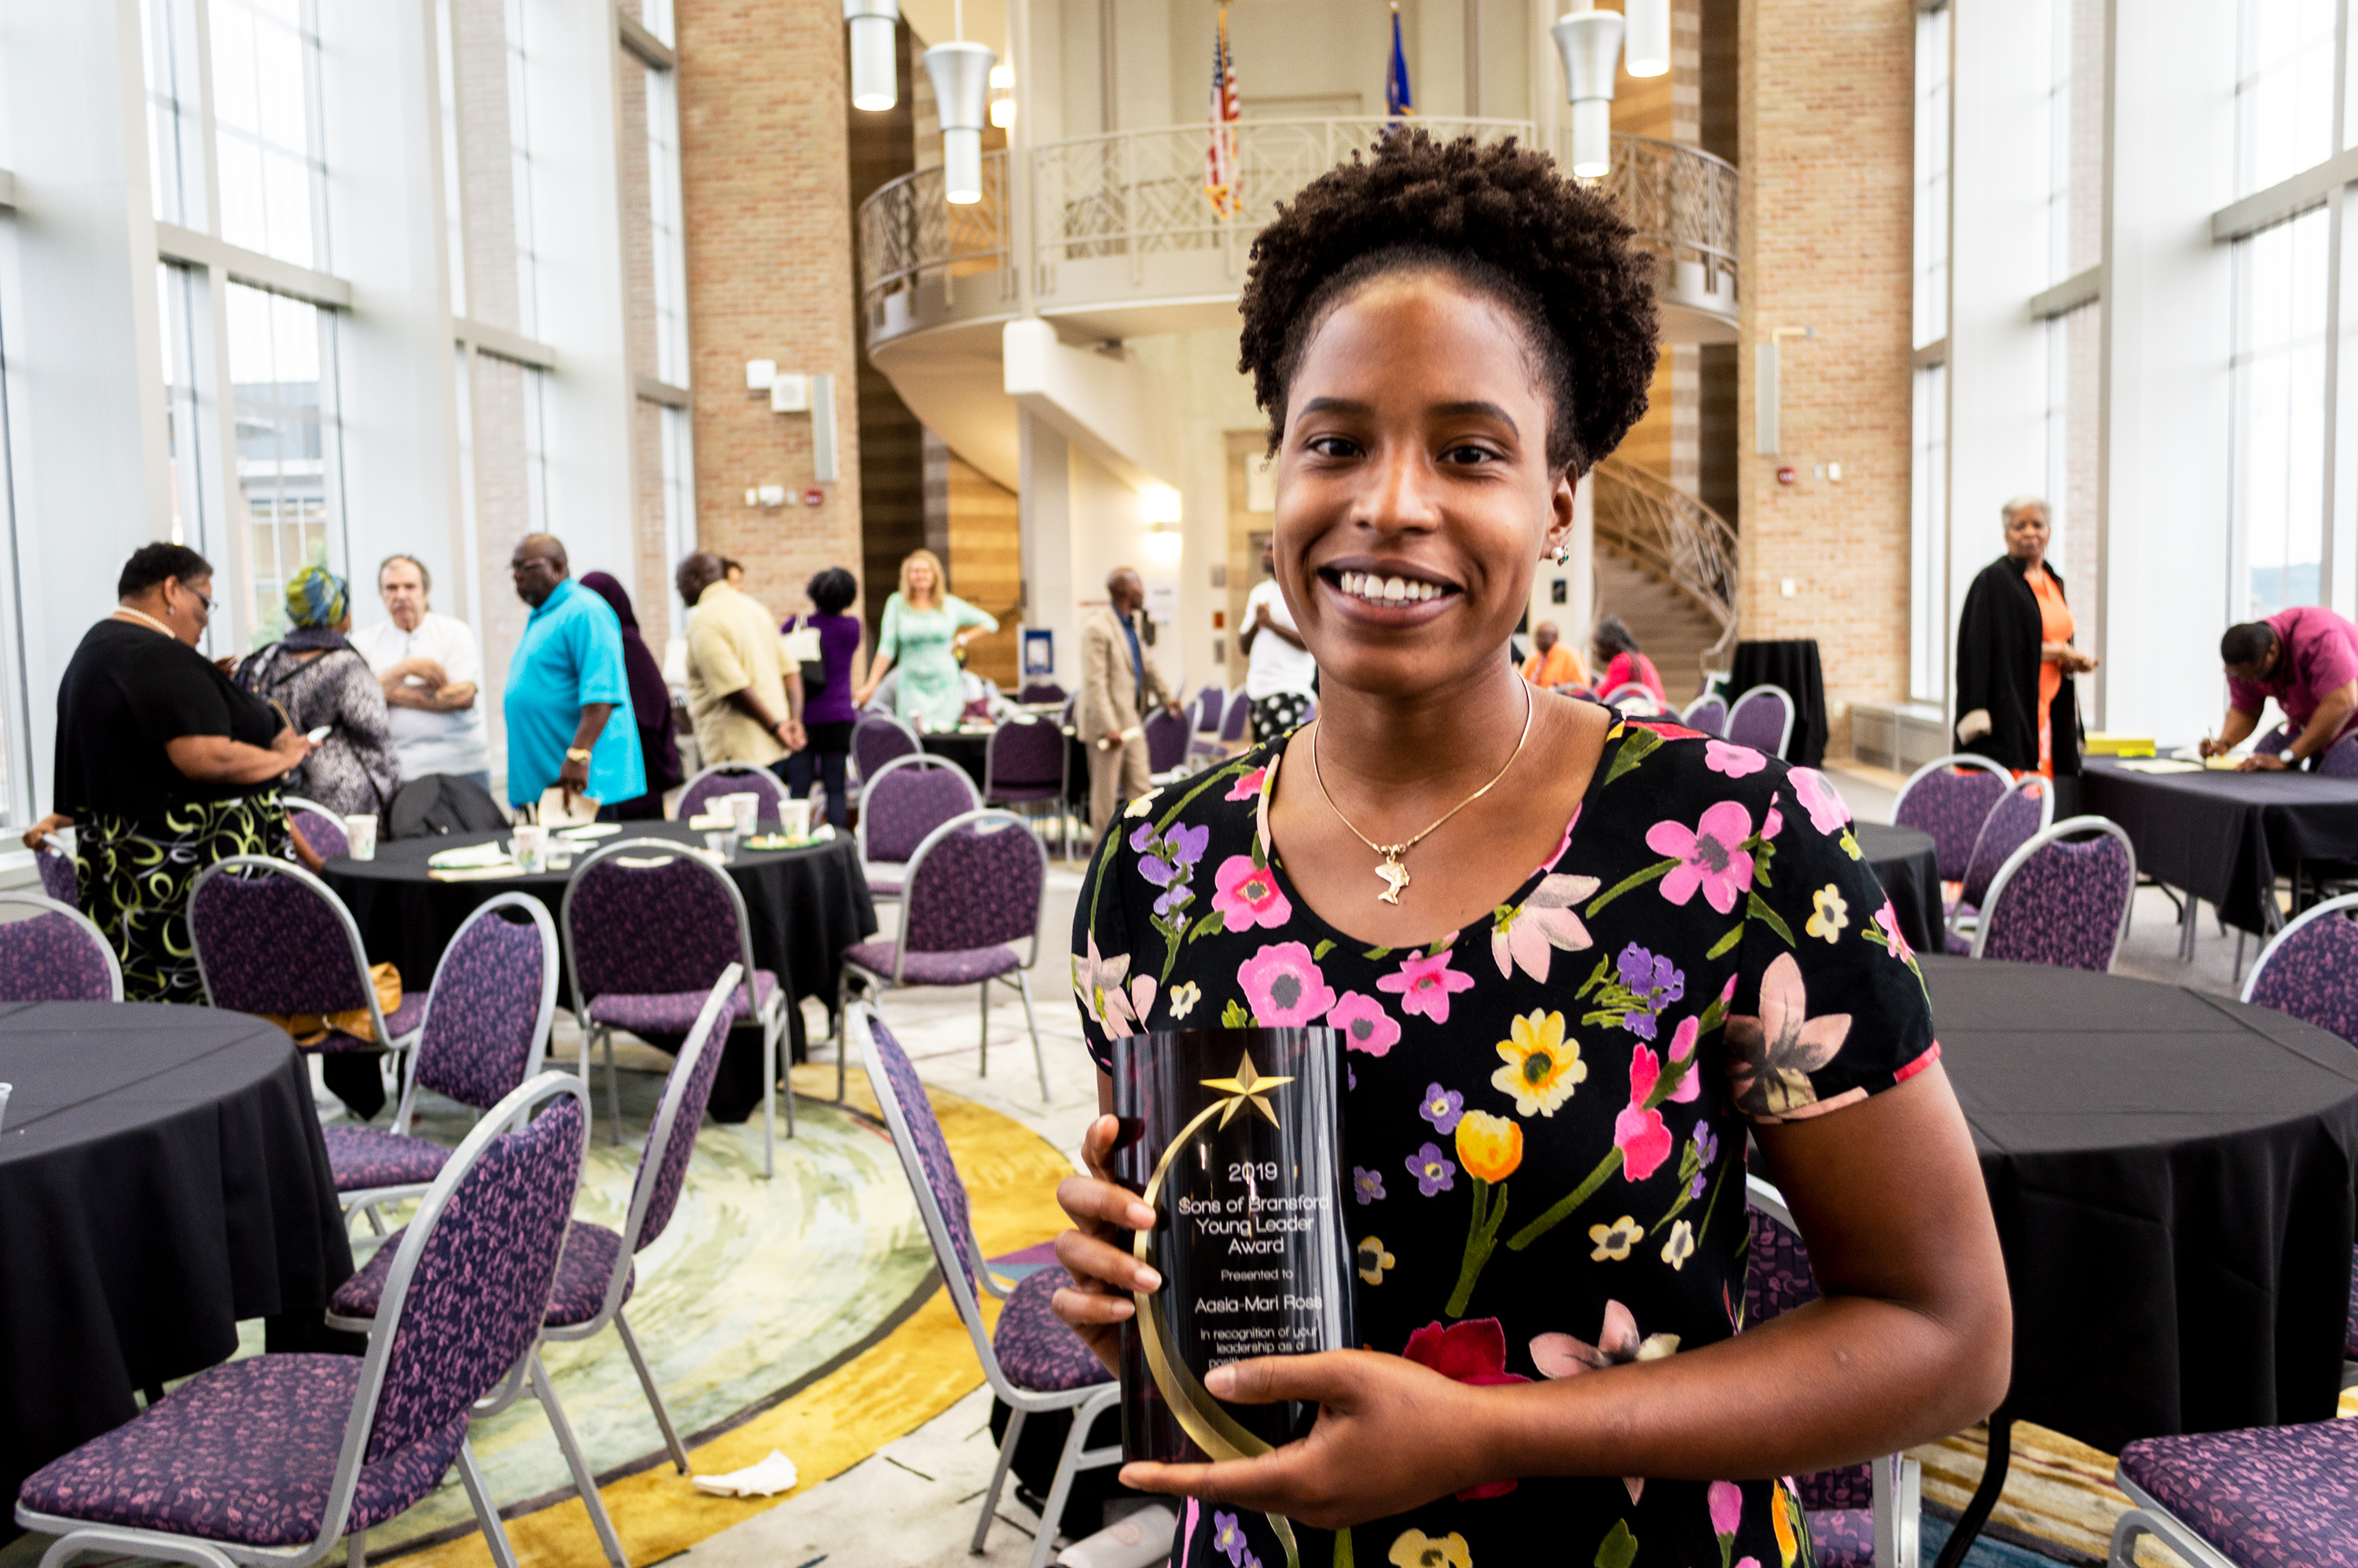 Aasia-Mari Ross poses with her Young Leader Award after the 2019 Sons of Bransford awards ceremony. (Mandy Hathaway / The Metropolitan)